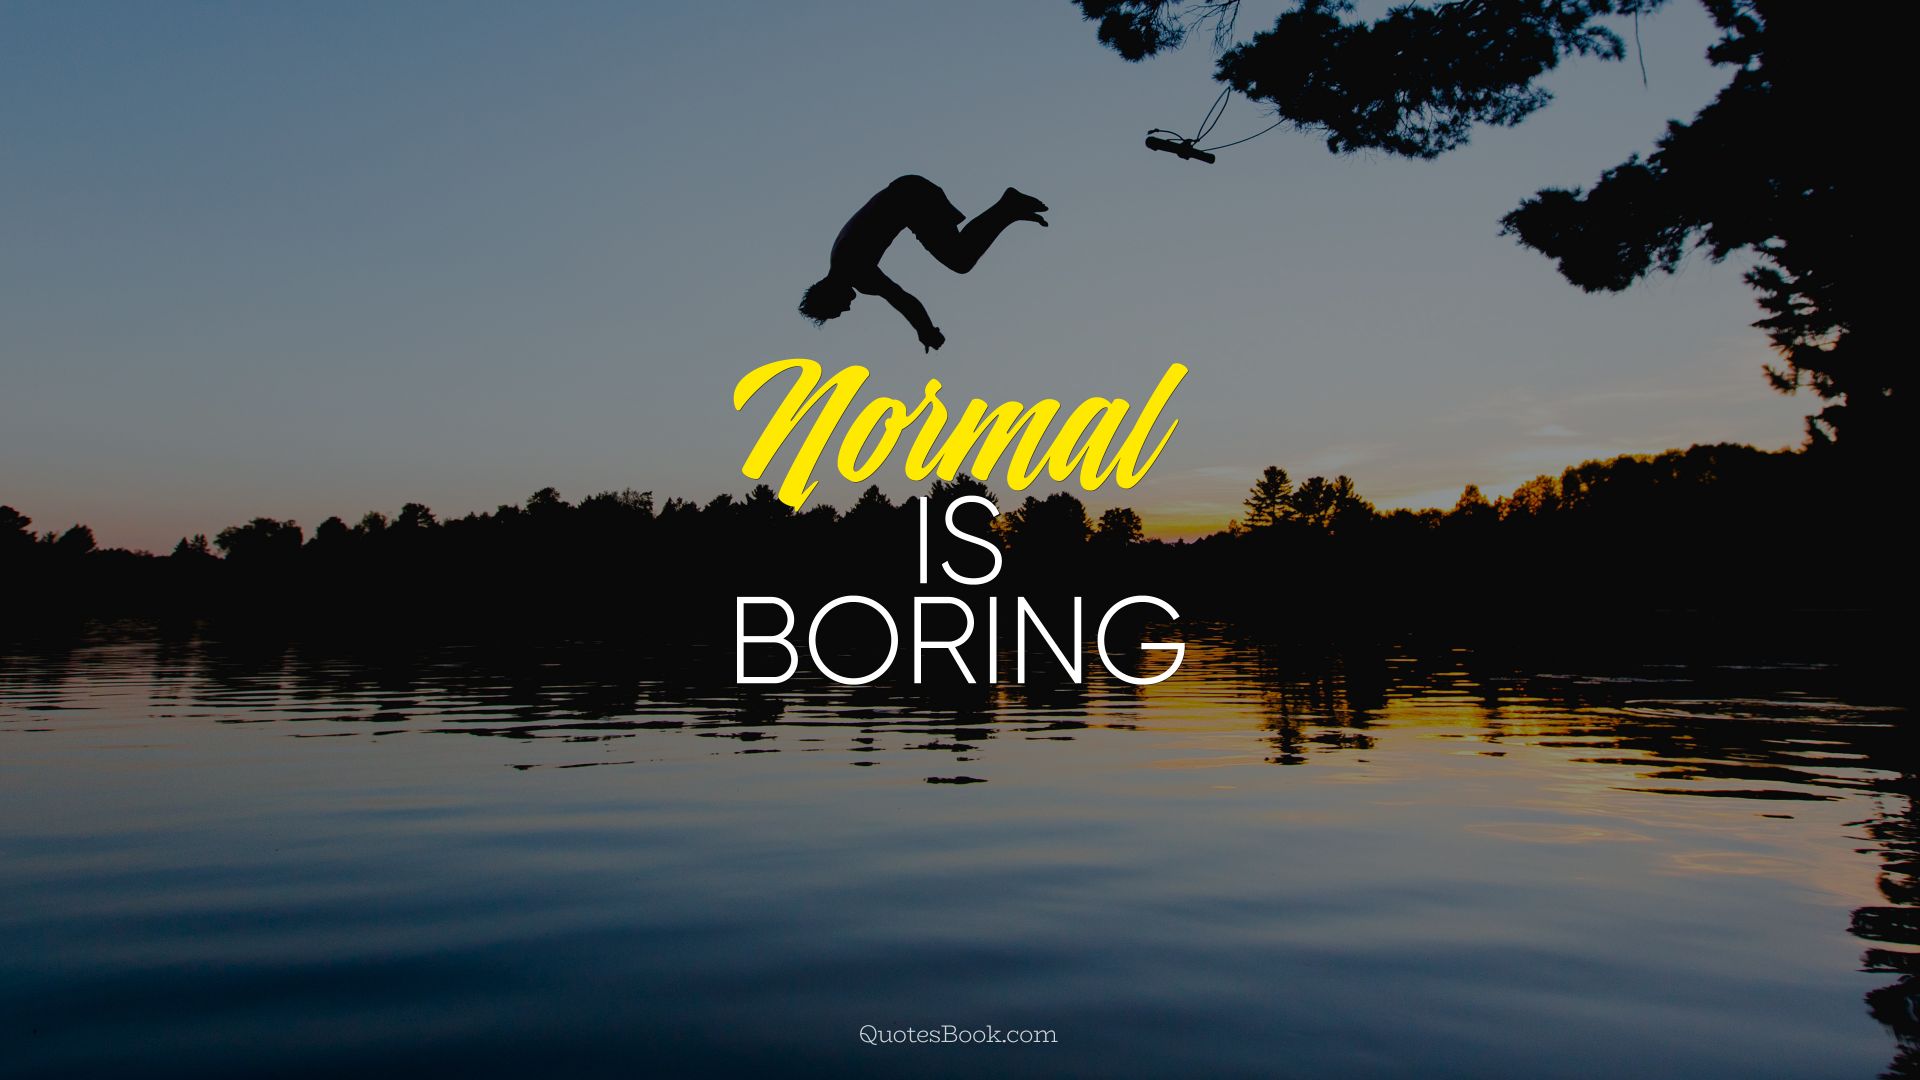 Normal is boring